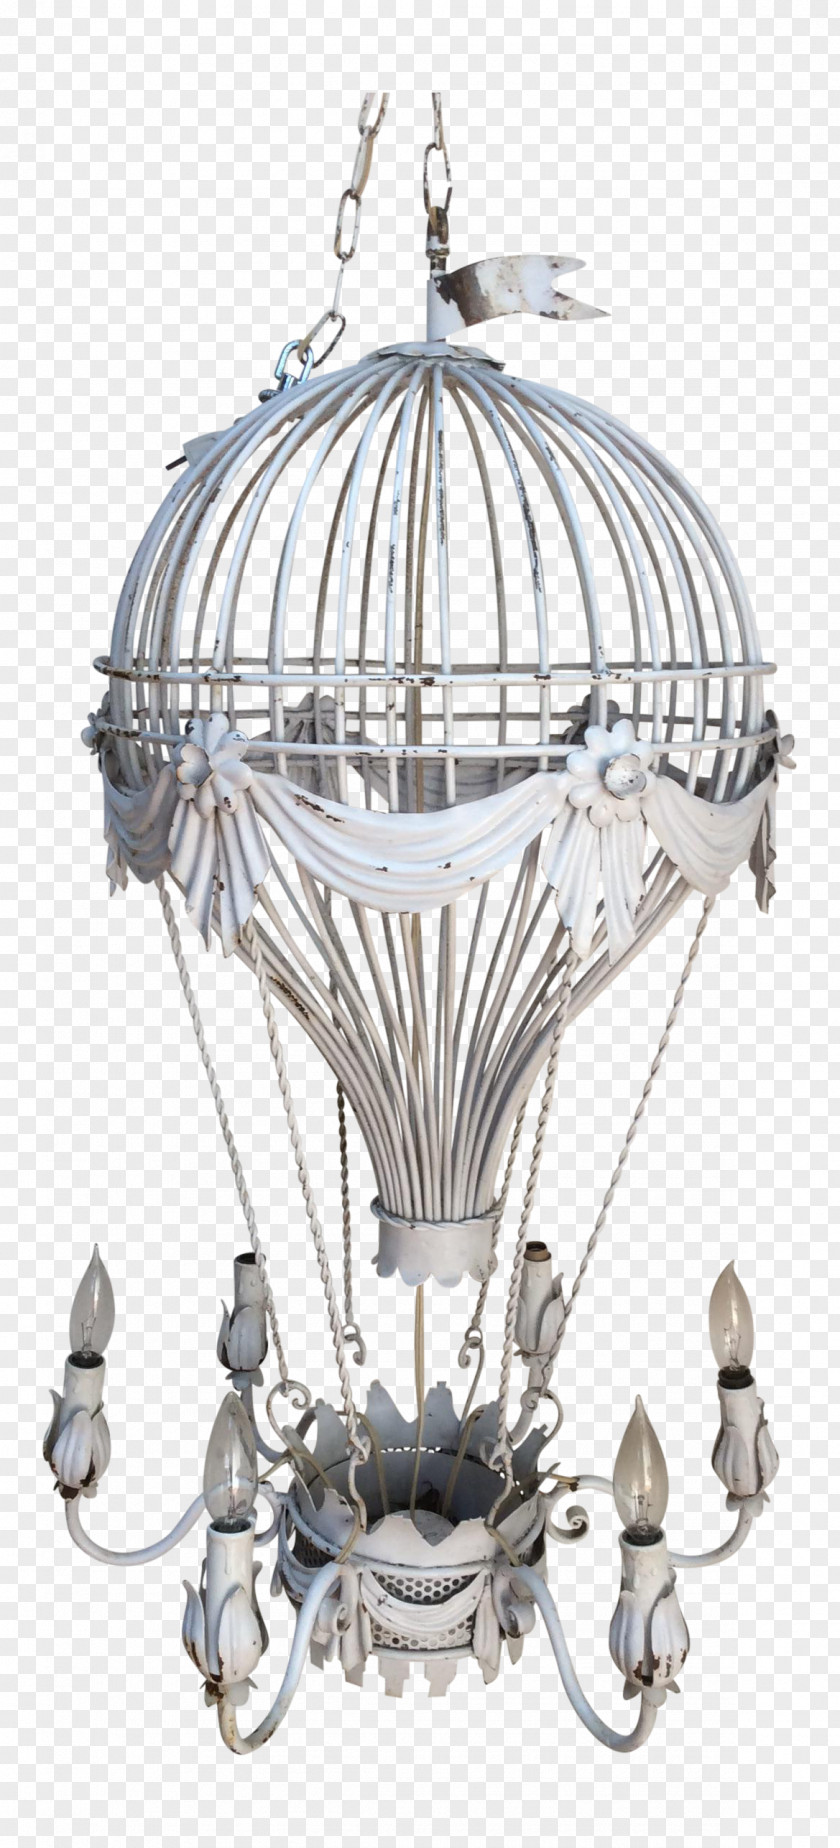 Balloon Chandelier Hot Air Electric Light Montgolfier Brothers PNG